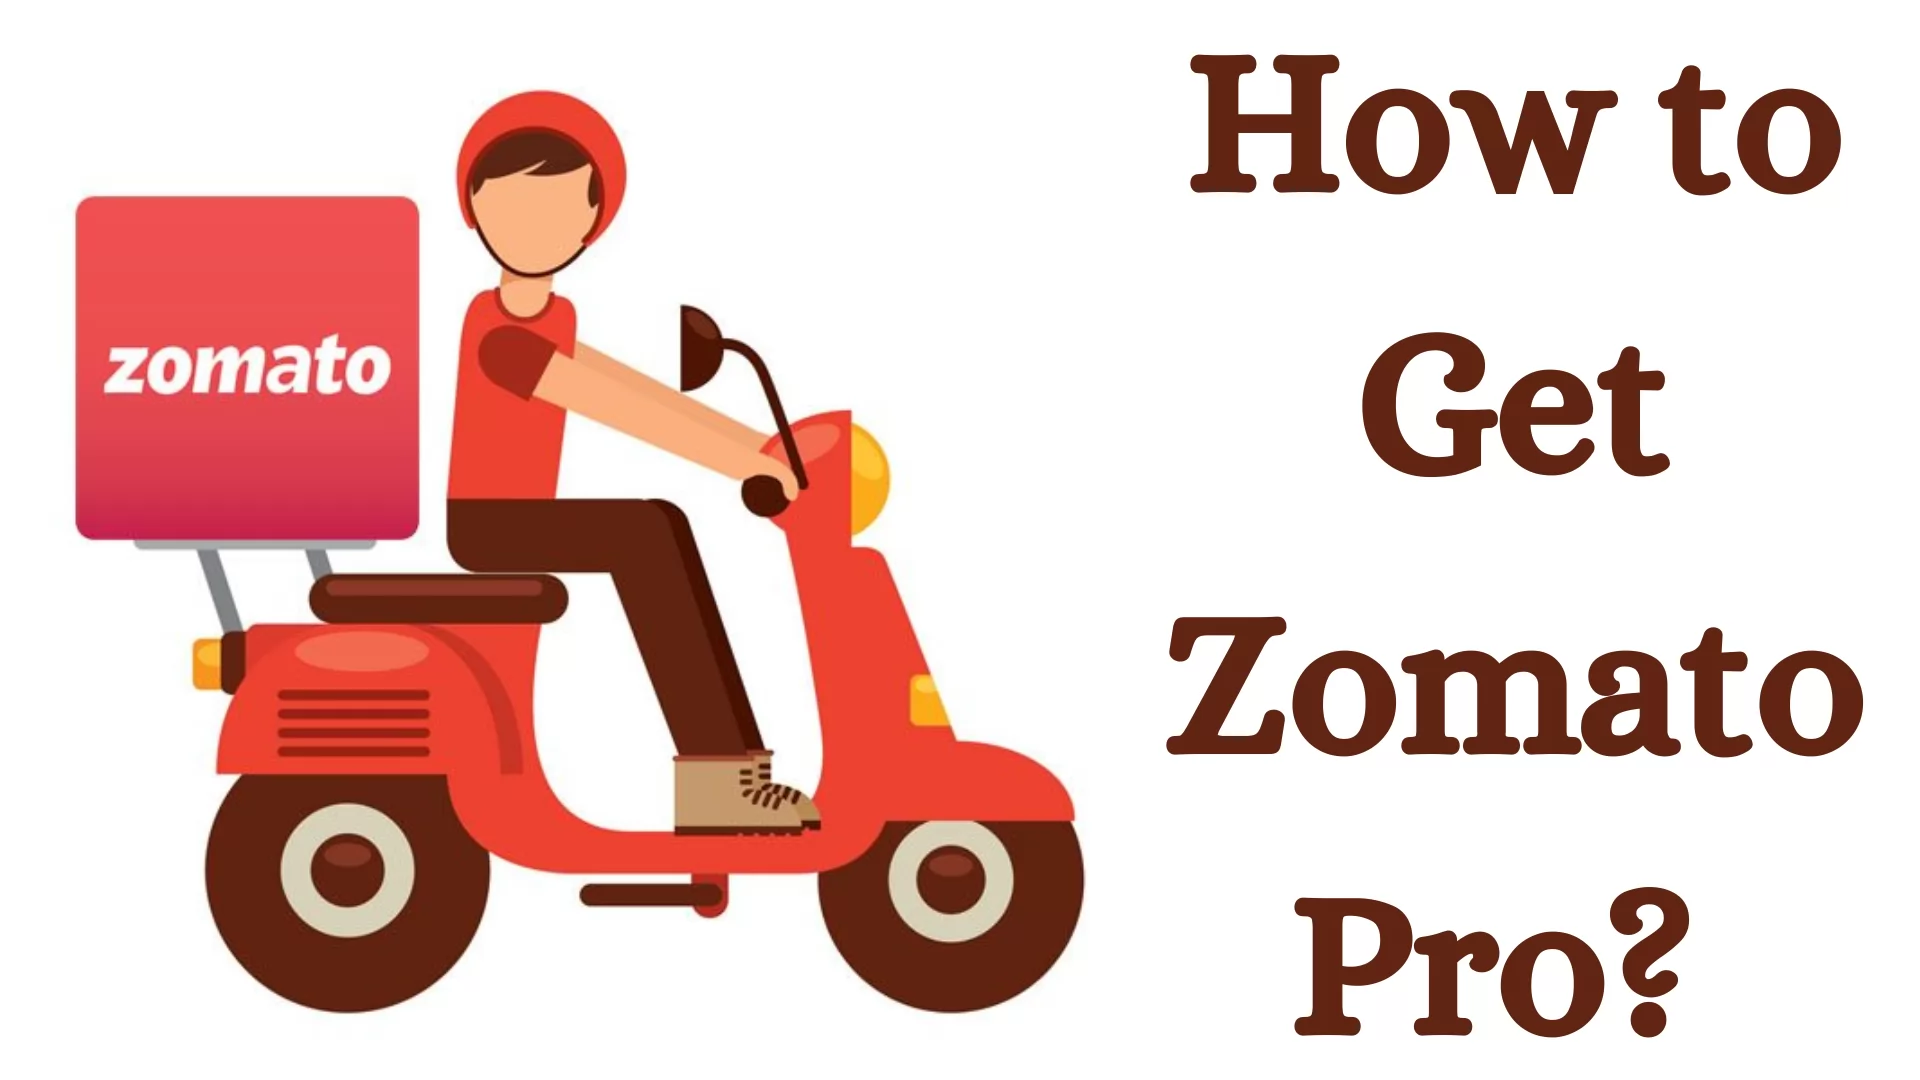 How to Get Zomato Pro